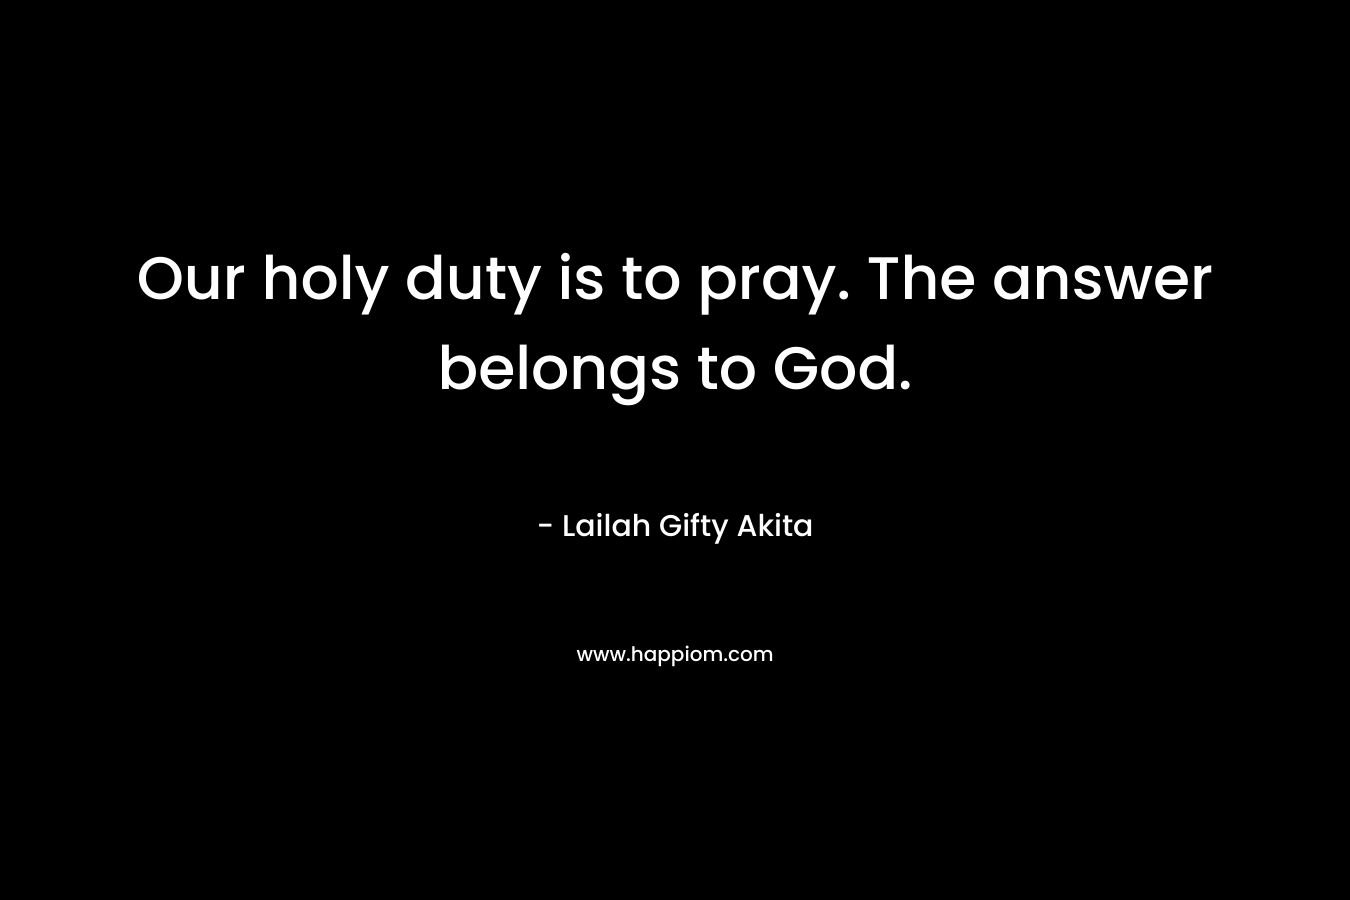 Our holy duty is to pray. The answer belongs to God.